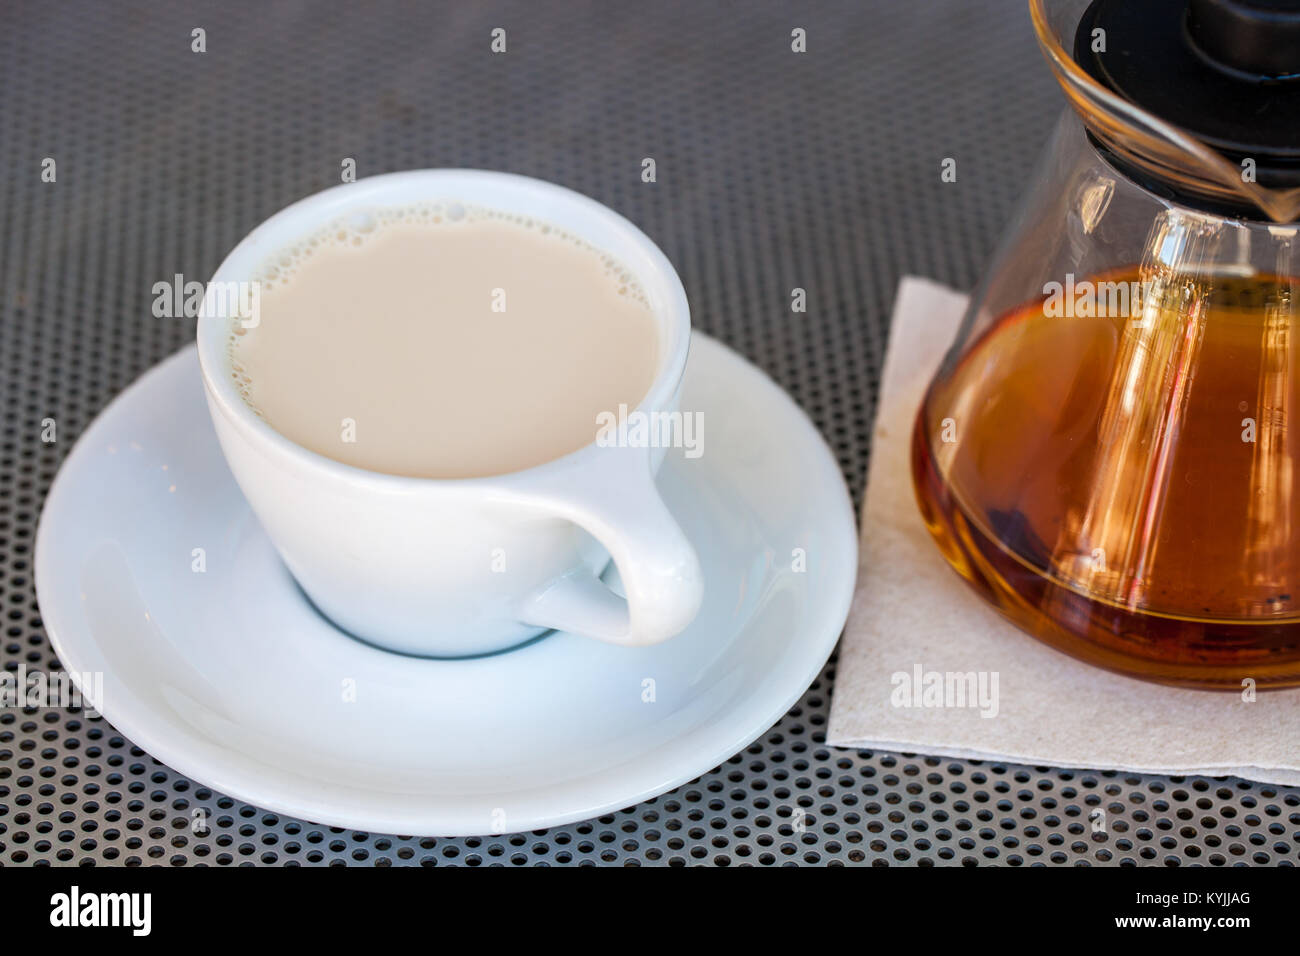 Selective focus of black tea with milk in white porcelain cup with teapot next to it on a metallic table Stock Photo